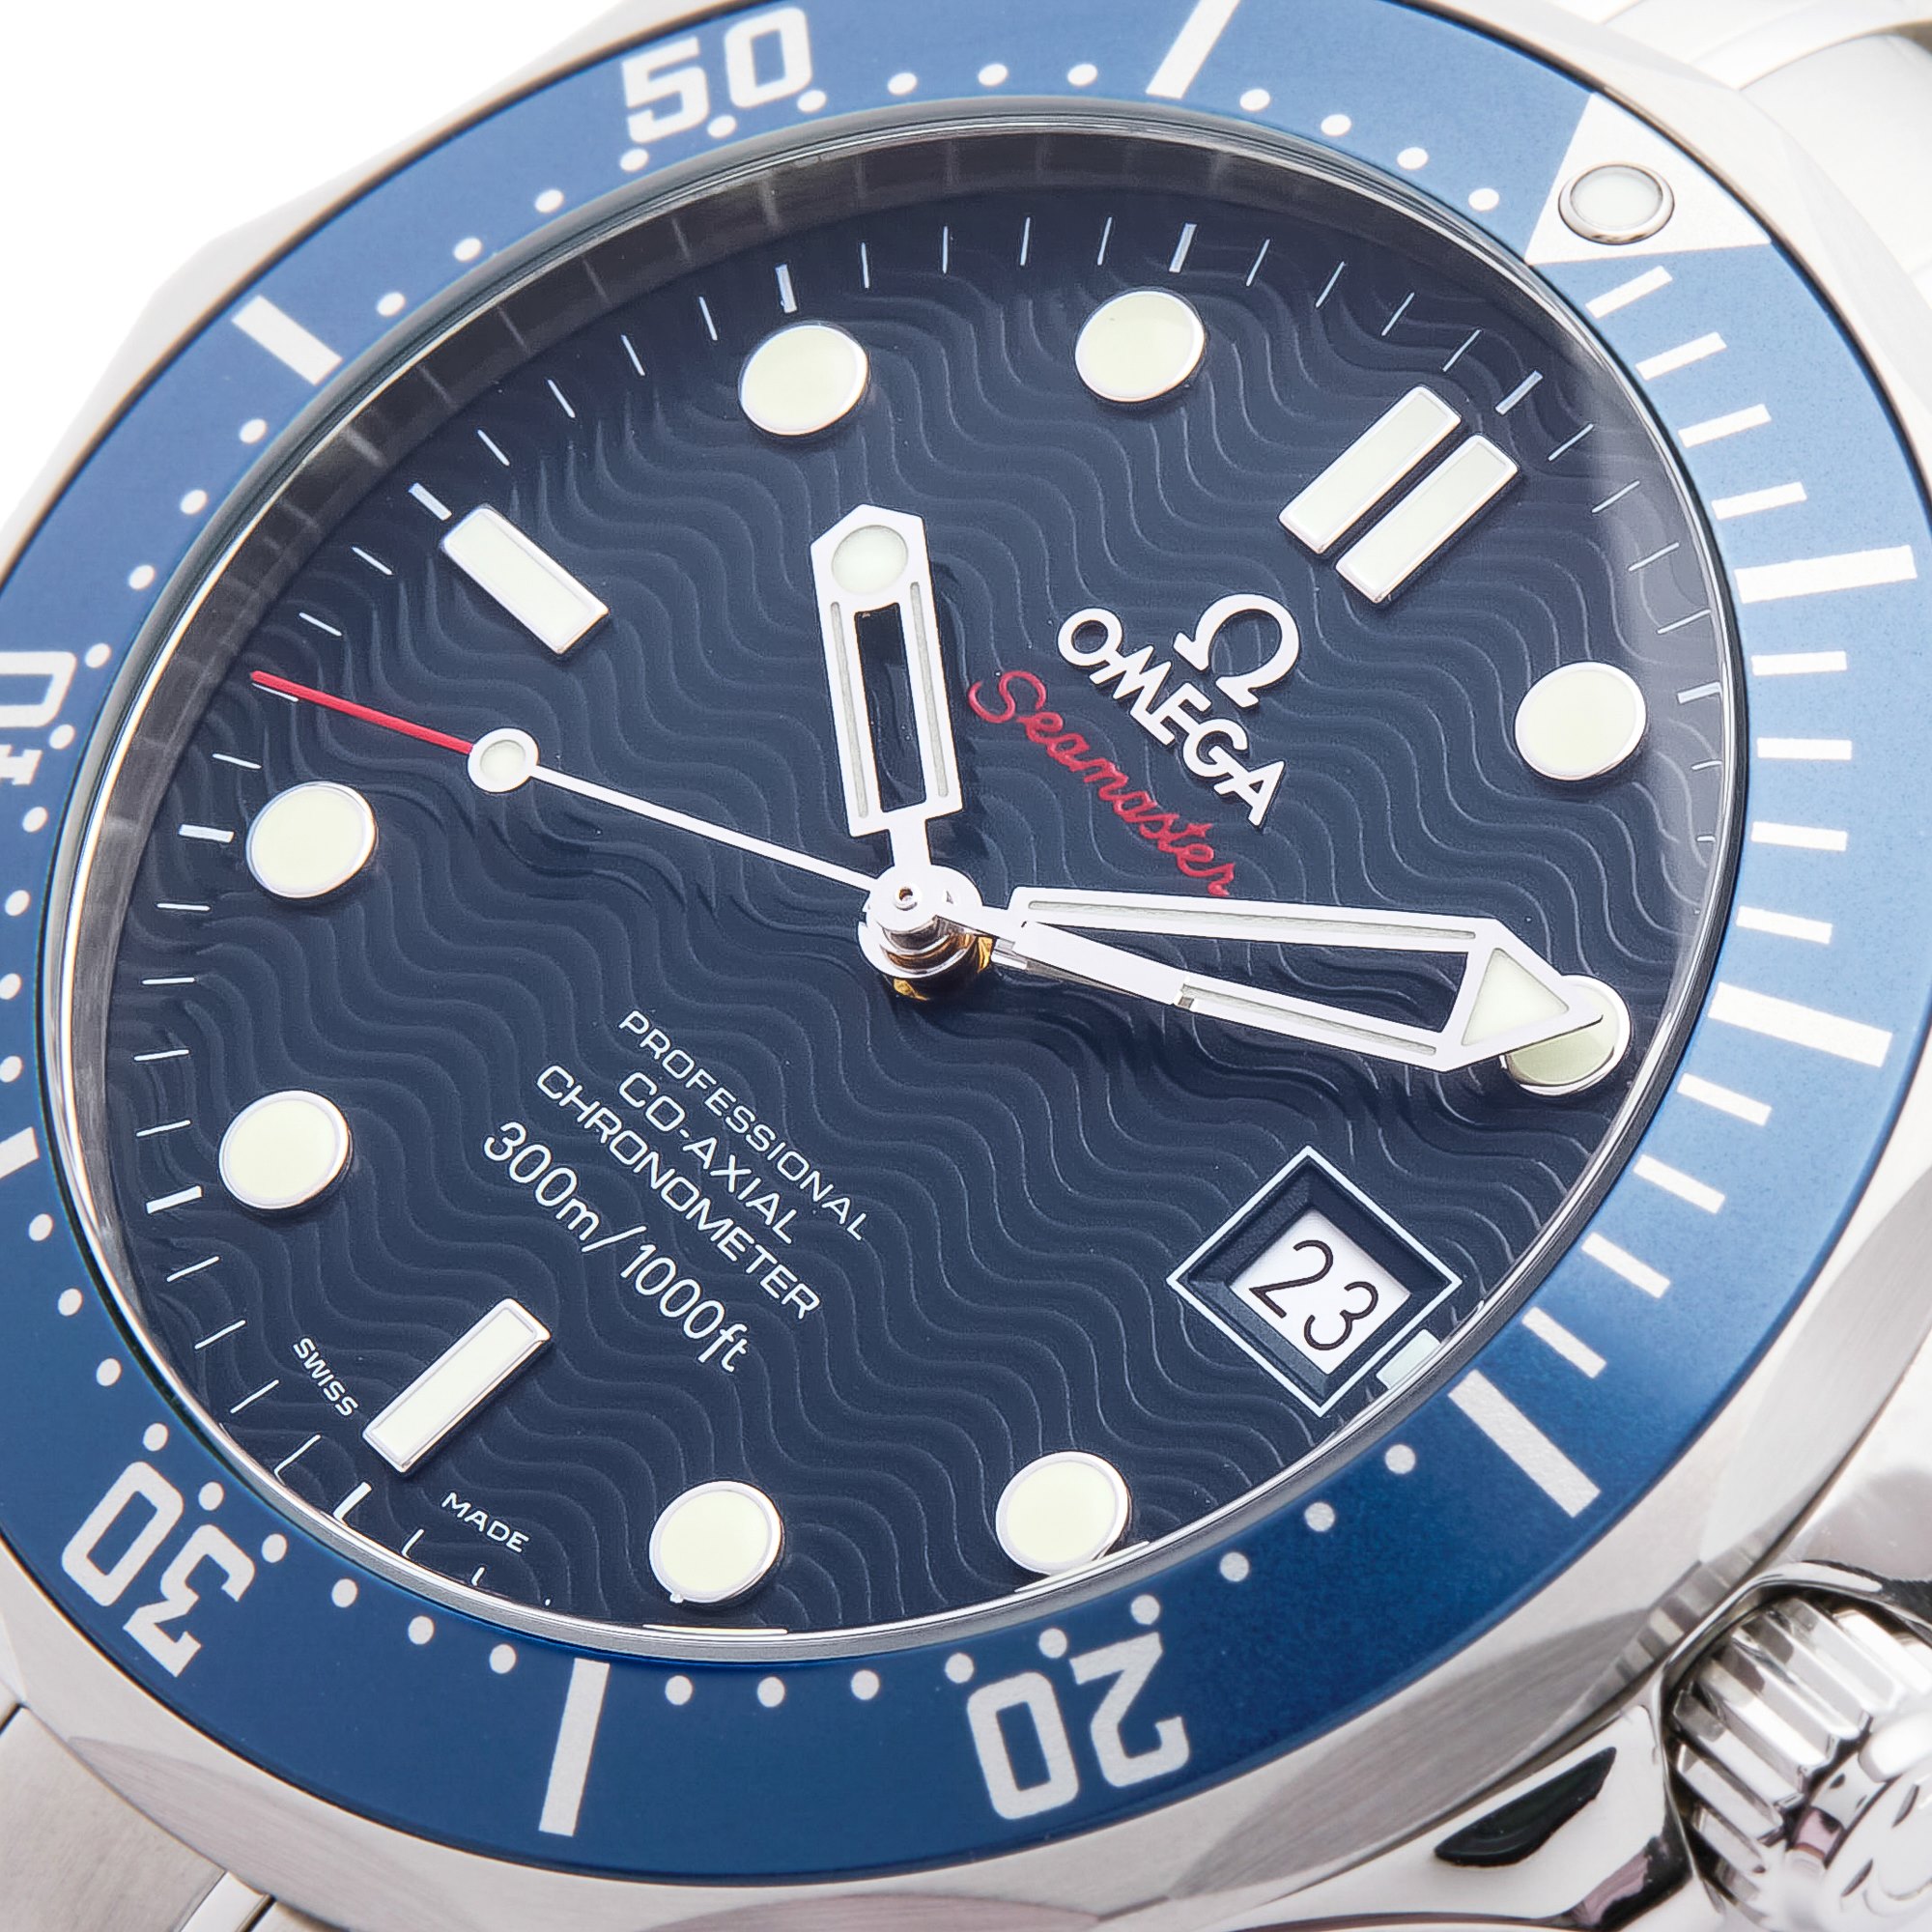 Omega Seamaster Professional Stainless Steel 2220.80.00